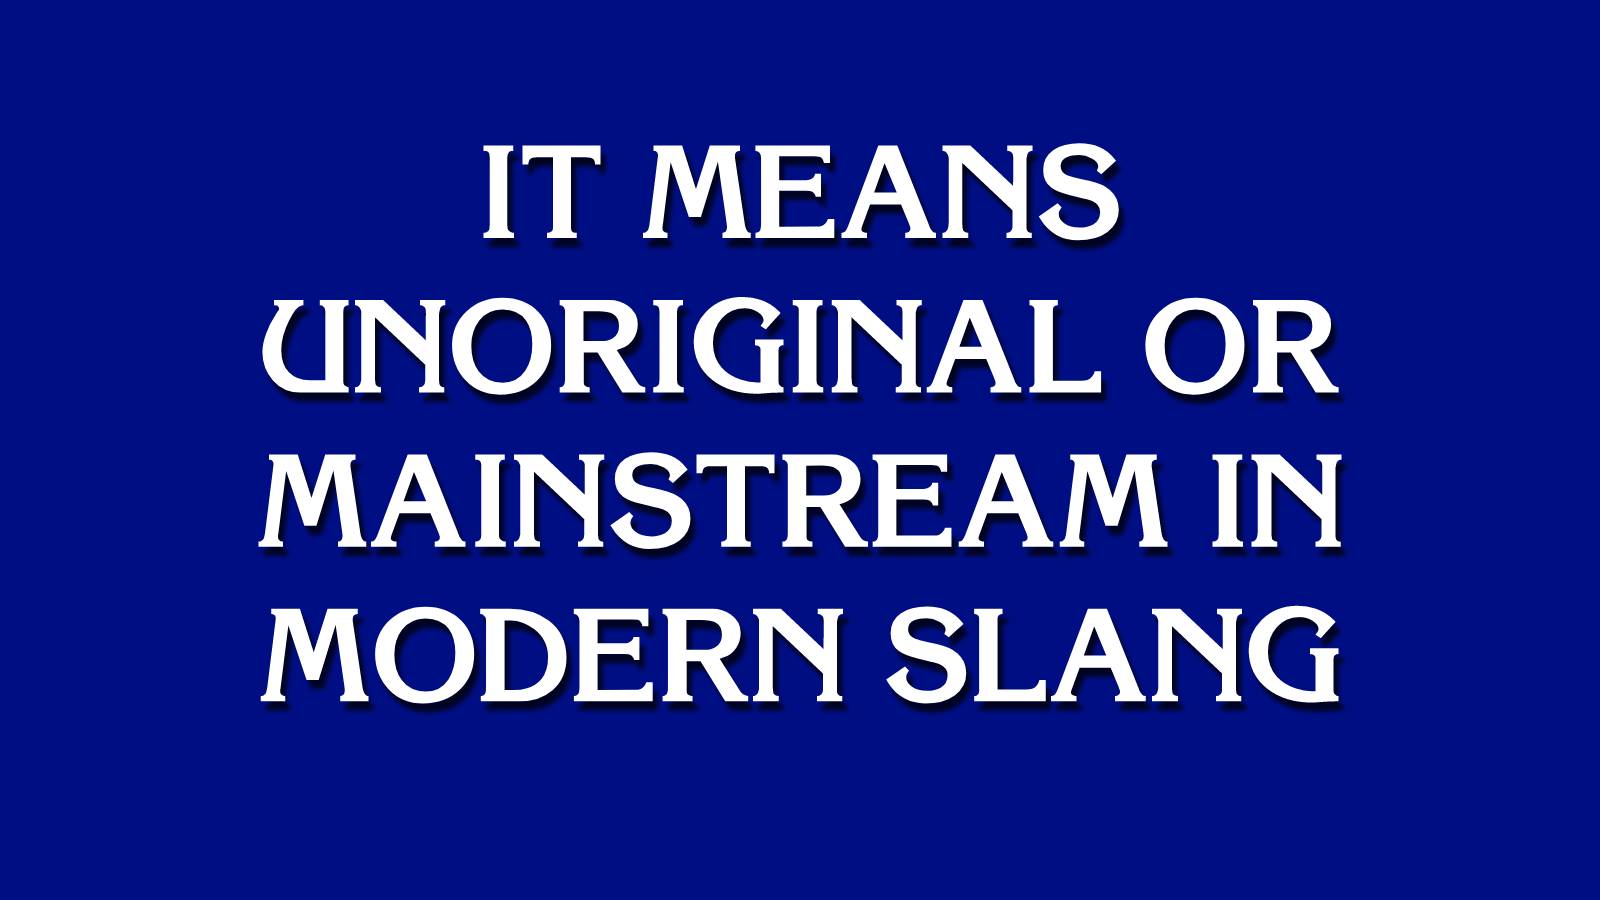 Can You Beat Your Friends in This “Jeopardy!” Quiz? Template Jeopardy 2